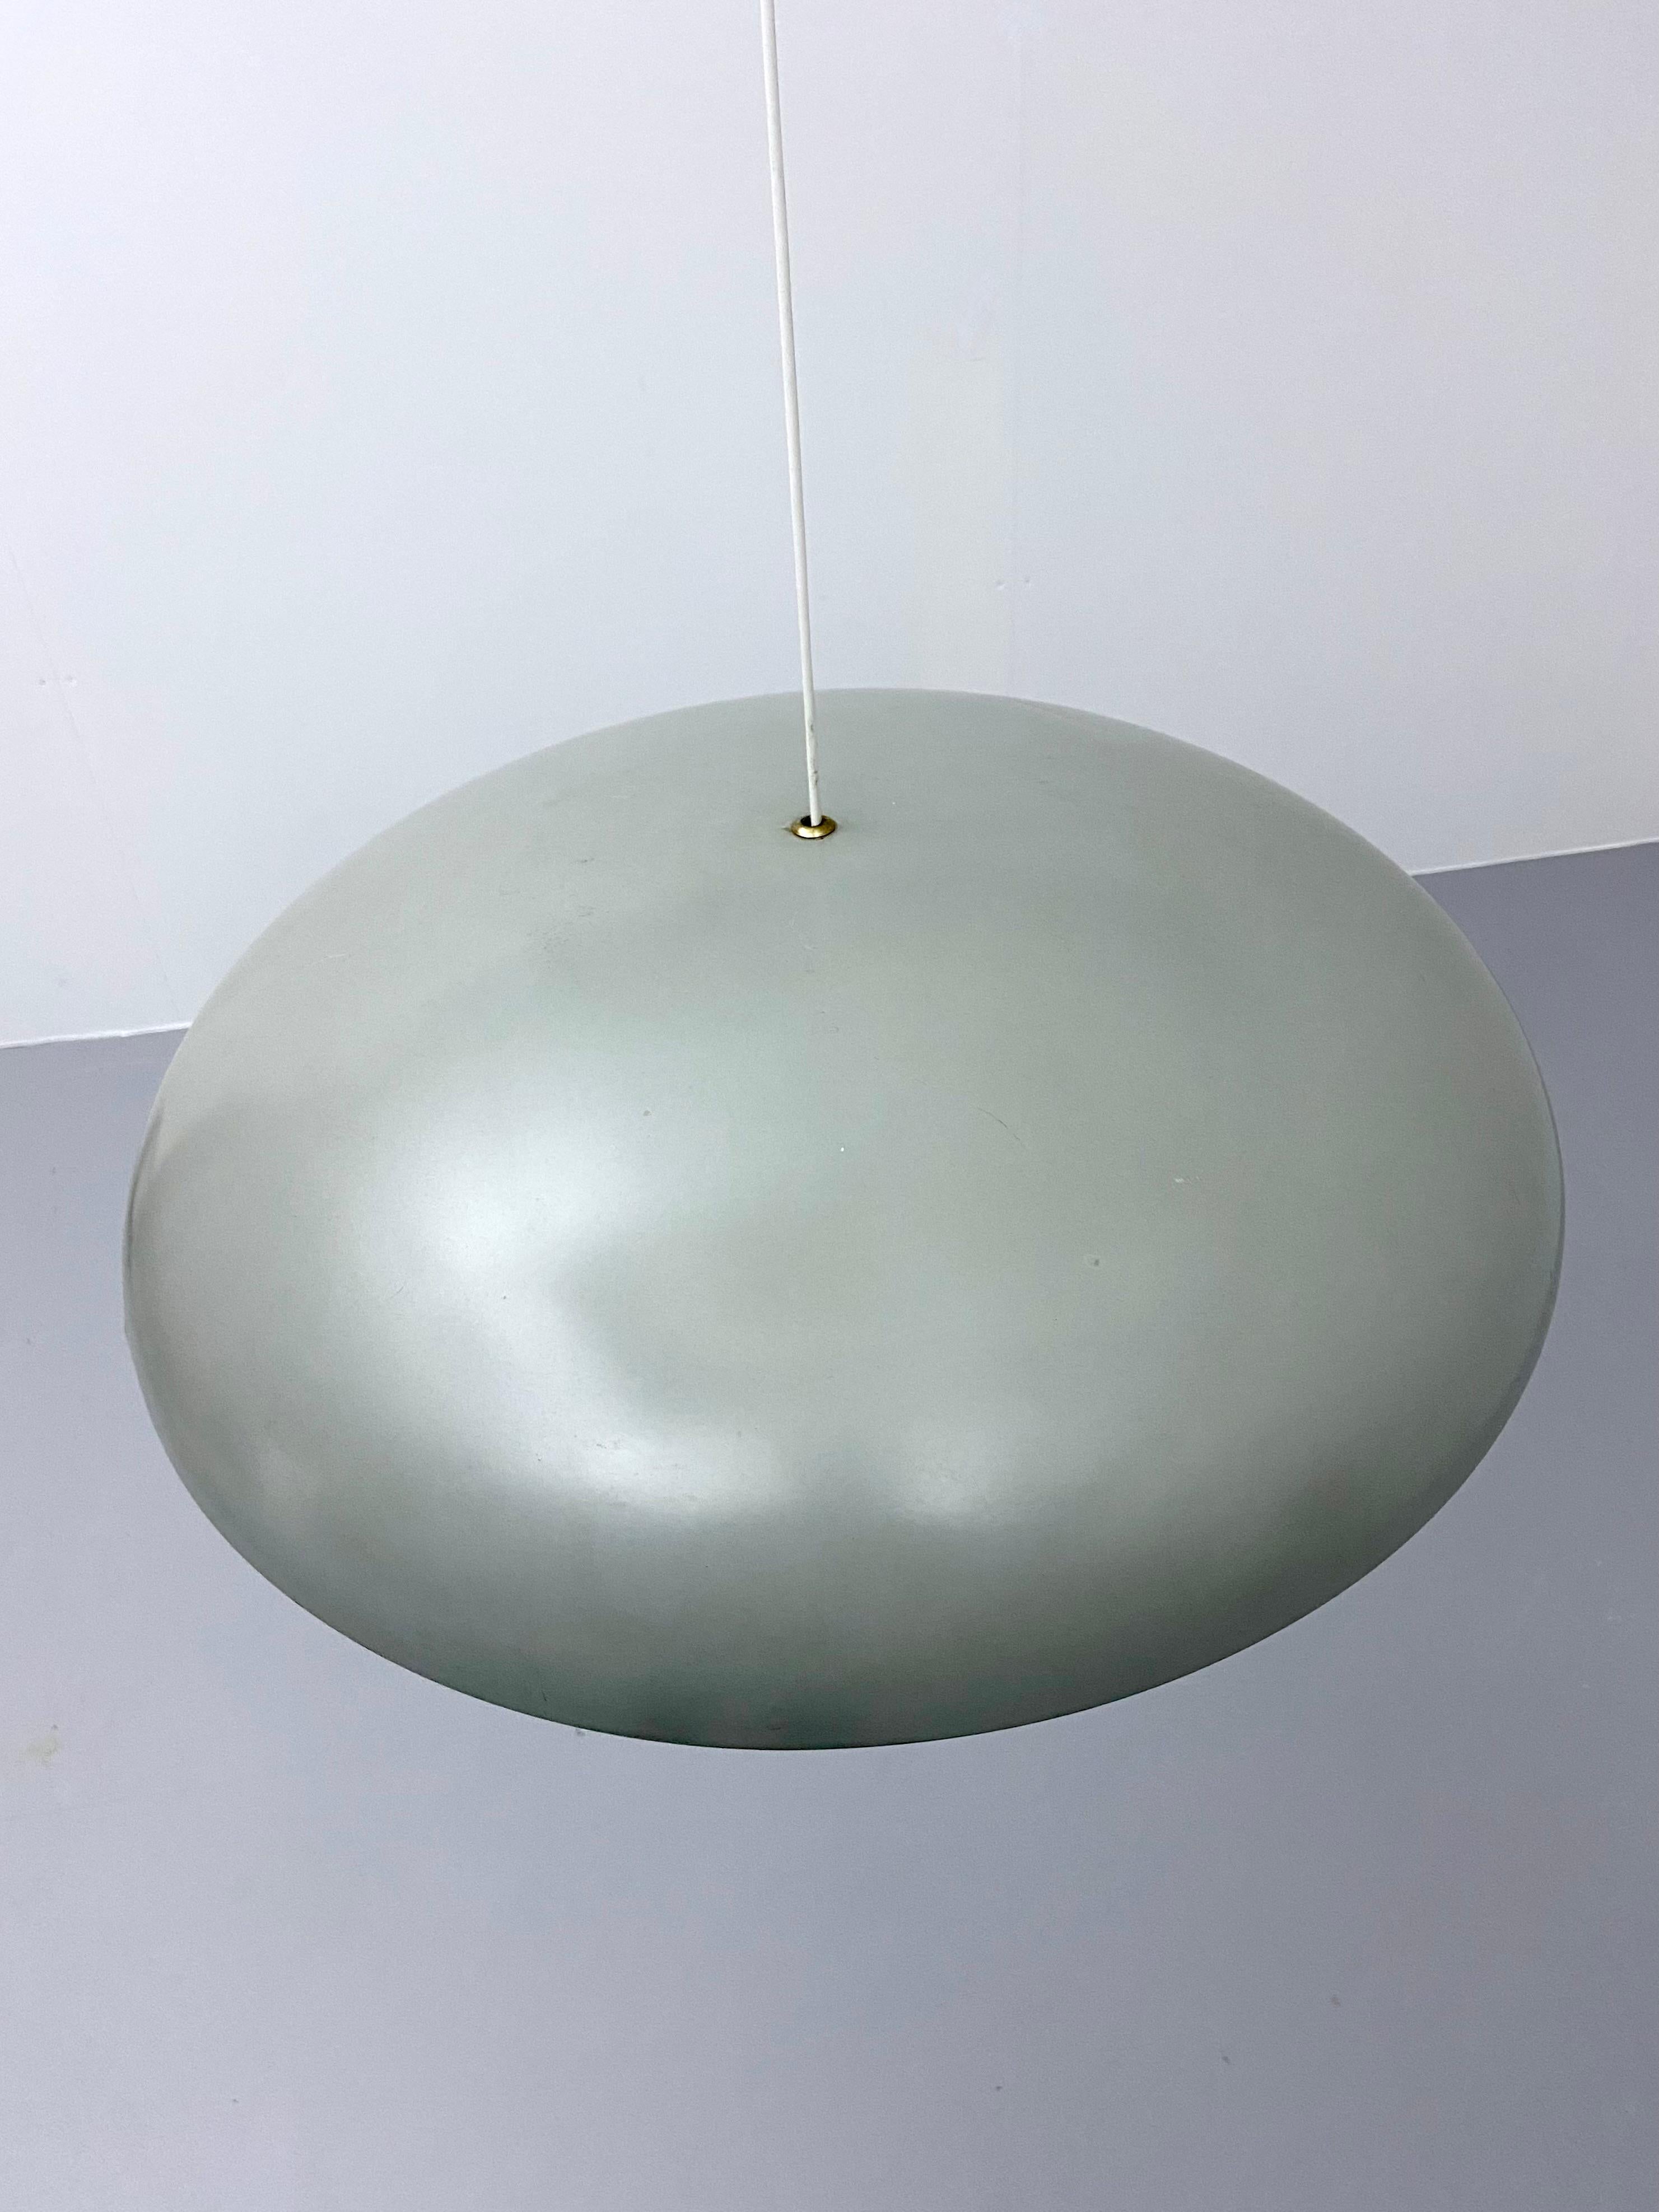 Designed in 1967 by Vilhelm Wohlert & Jørgen Bo for Louis Poulsen, this large pendant offers three interior sockets and a series of diffusing rings for a bright, warm glow. Its quite large with its 66 cm diameter and the paint is still original. The